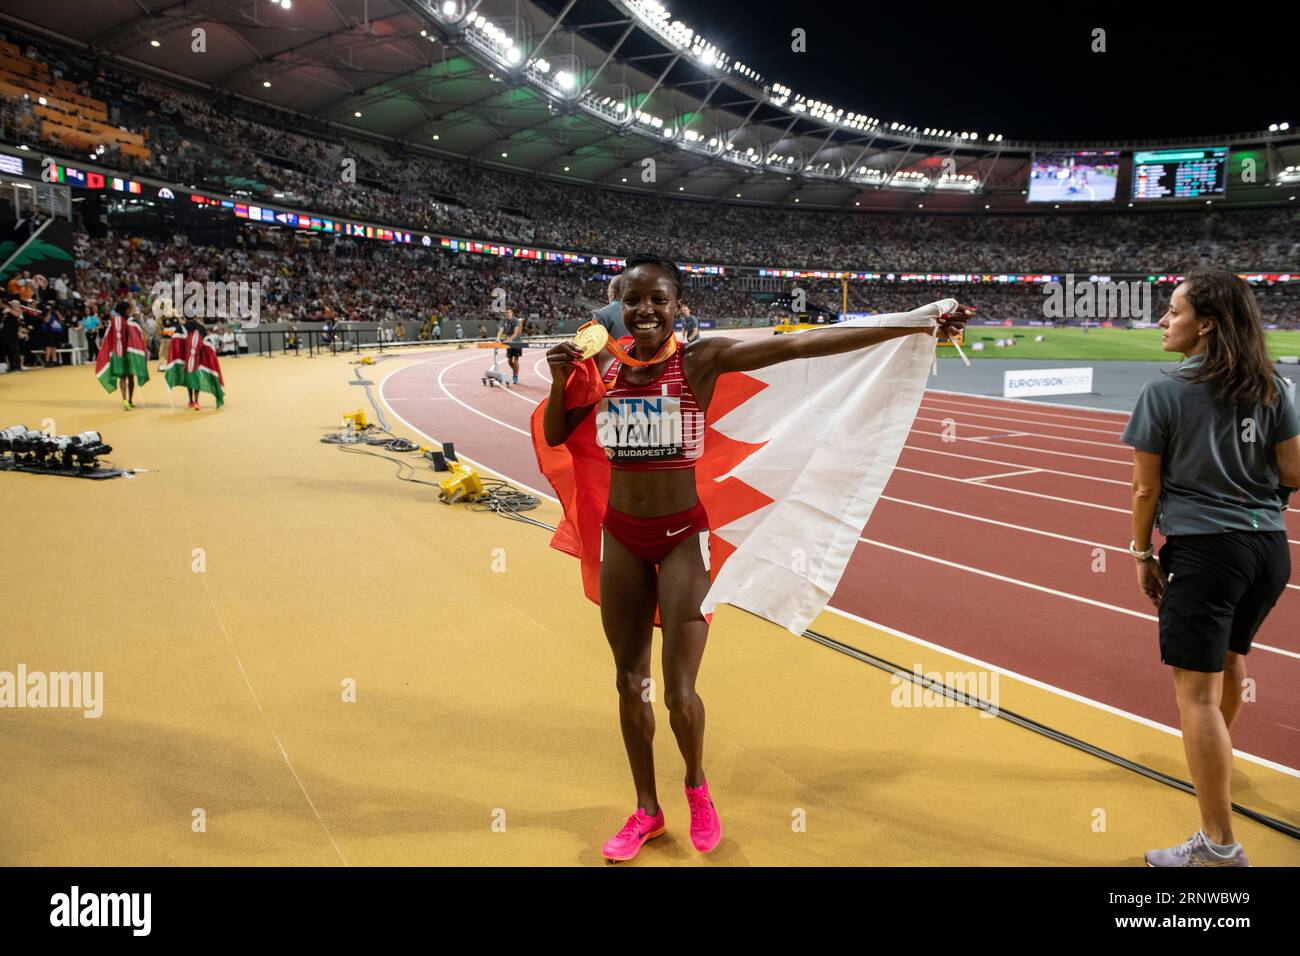 Winfred Yavi of Bahrain celebrate’s after competing in the women’s 3000m steeplechase on day nine at the World Athletics Championships at the National Stock Photo